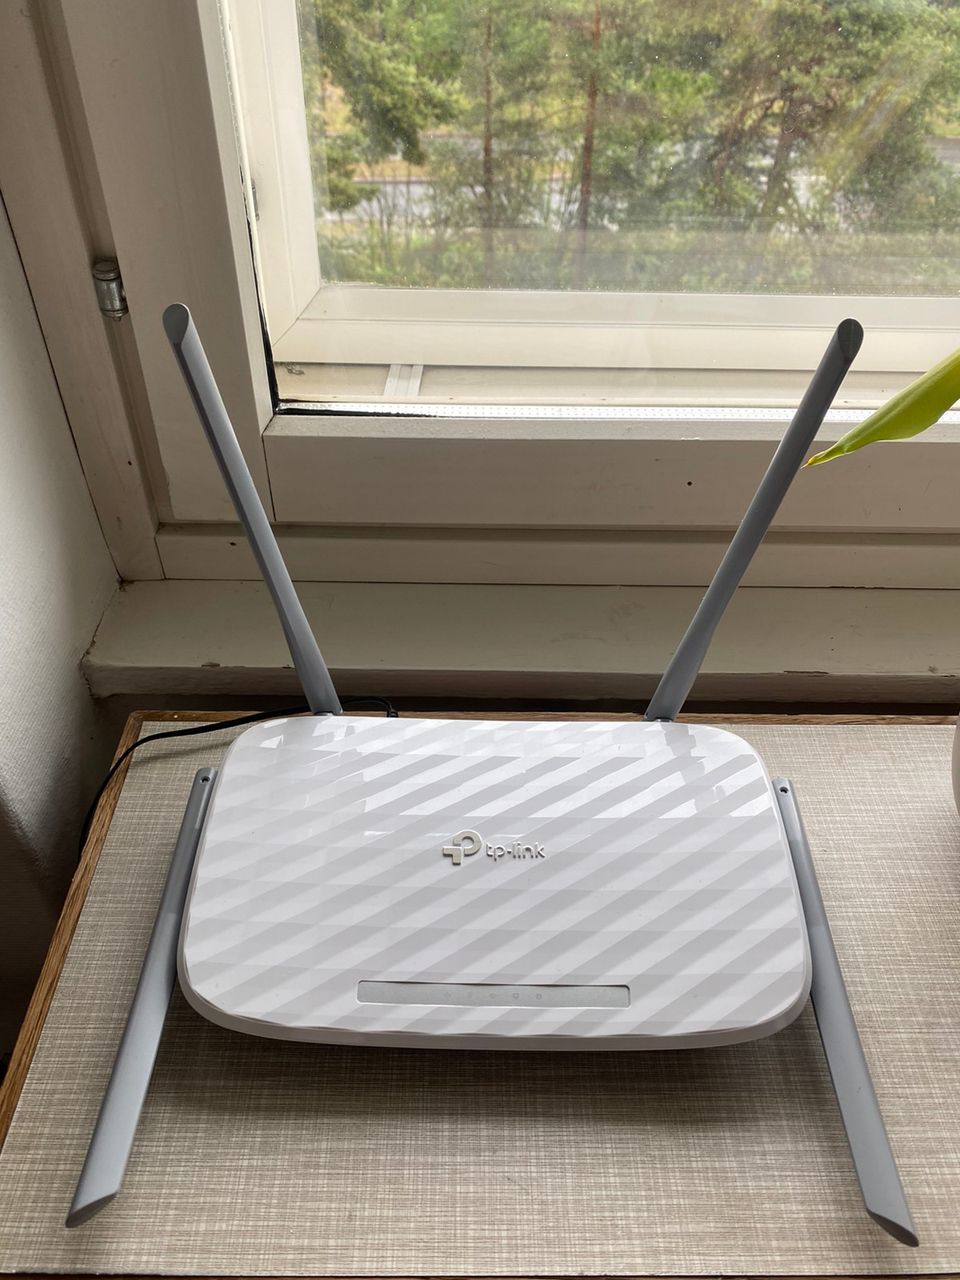 tb-link AC1200 Wi-Fi router